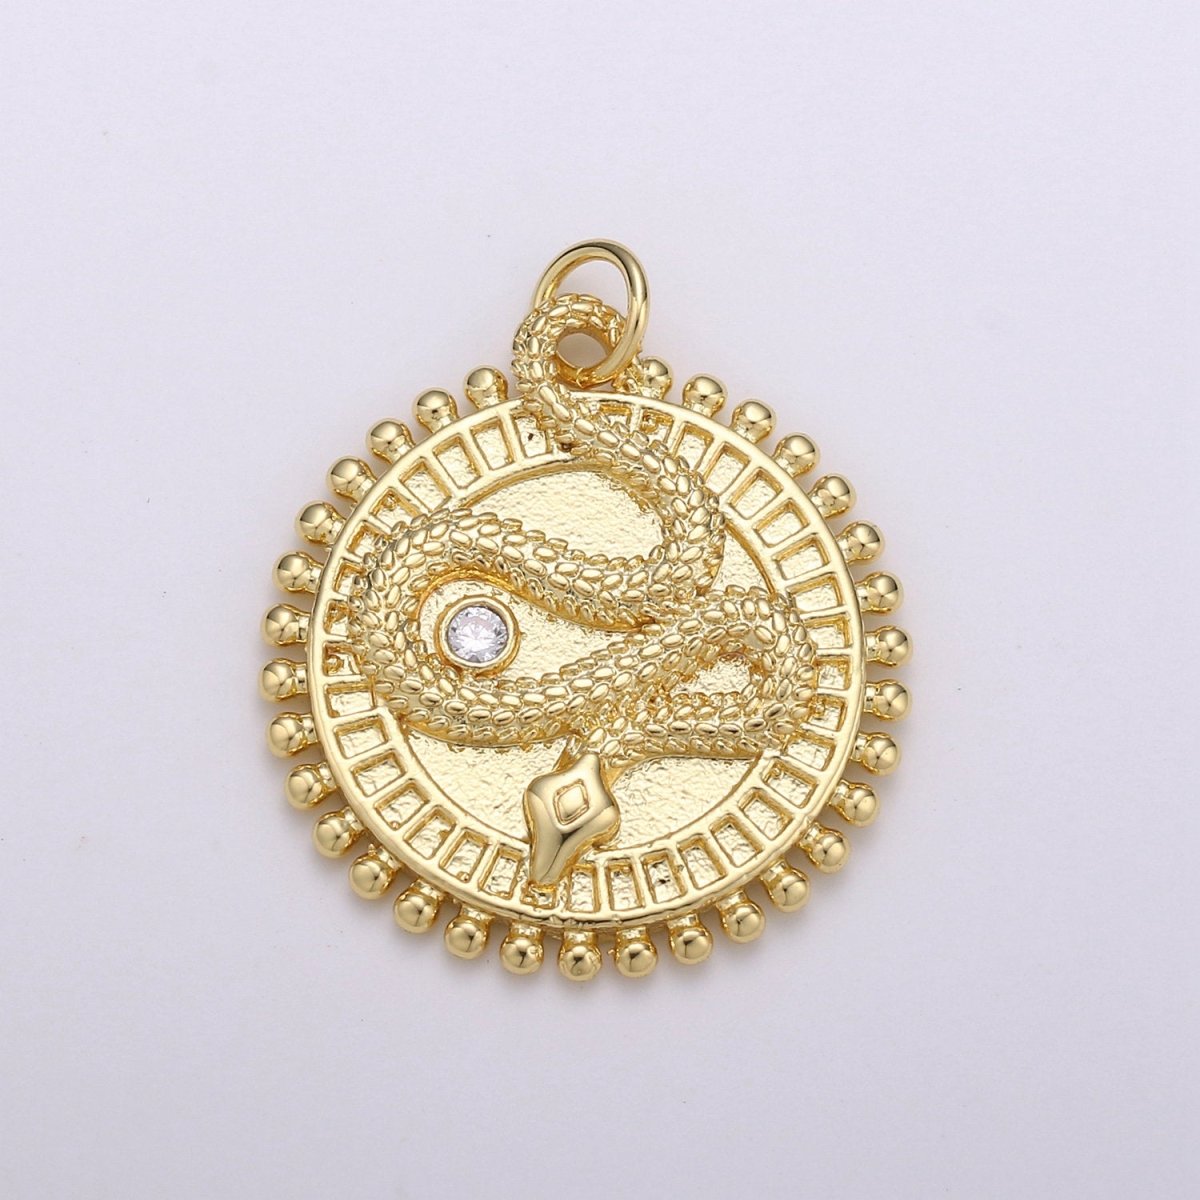 24k Gold Filled Snake Charm Gold medallion Coin Pendant, 25x23mm Round Disc Micro Pave Serpent Snake Jewelry for Necklace Component D-348 - DLUXCA